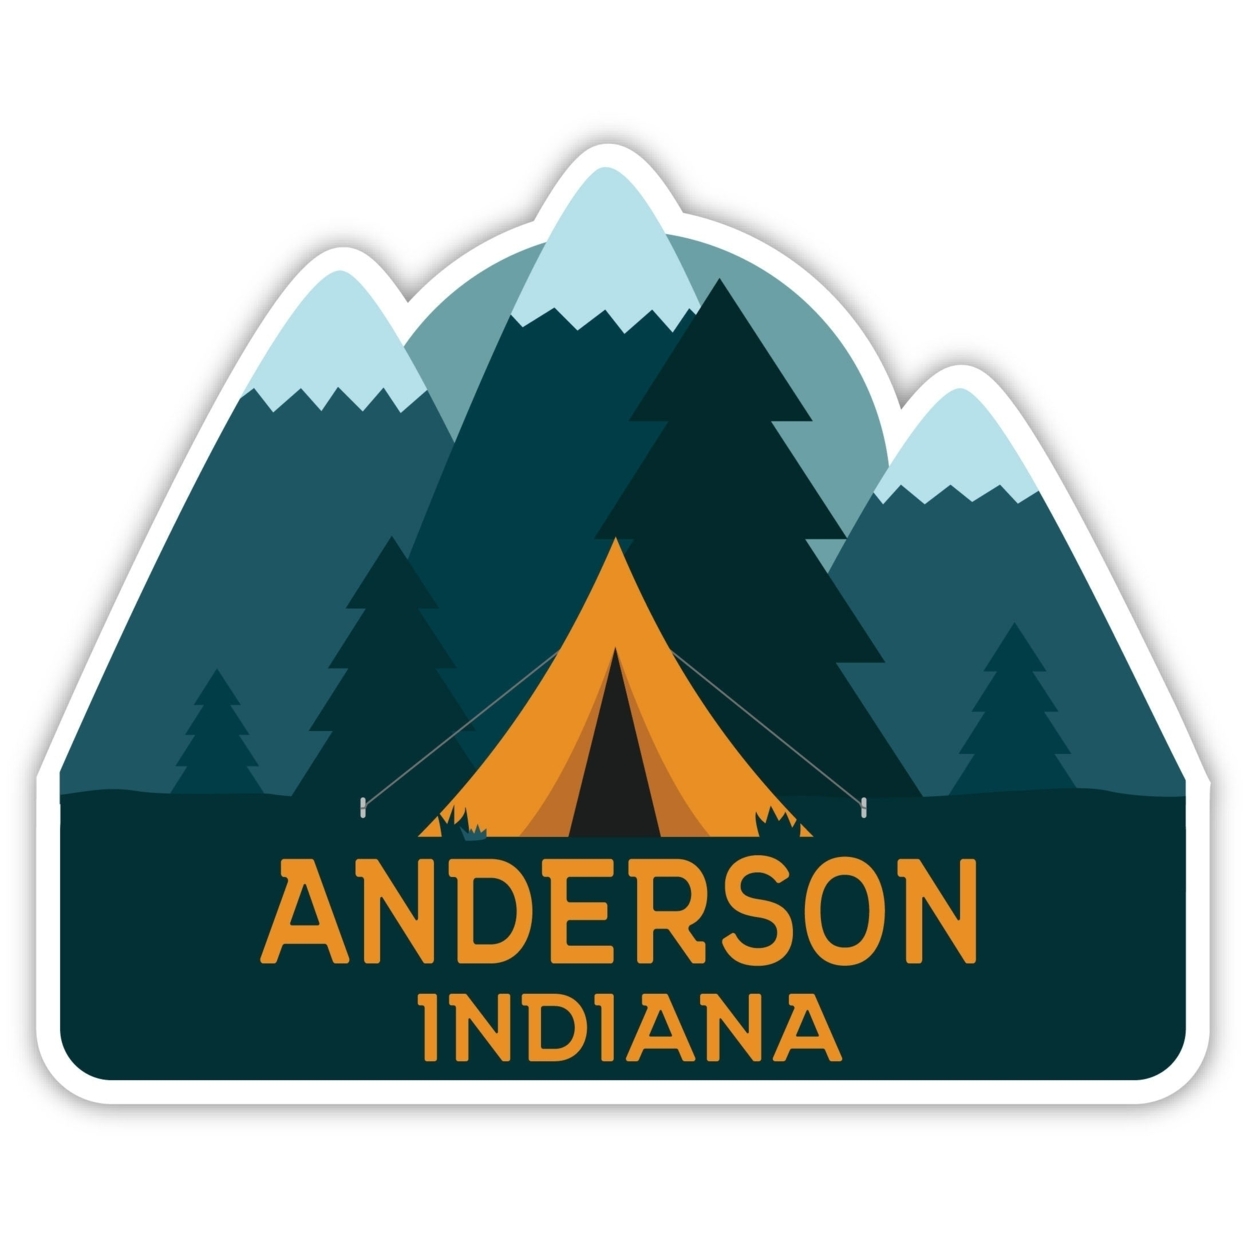 Anderson Indiana Souvenir Decorative Stickers (Choose Theme And Size) - Single Unit, 4-Inch, Tent